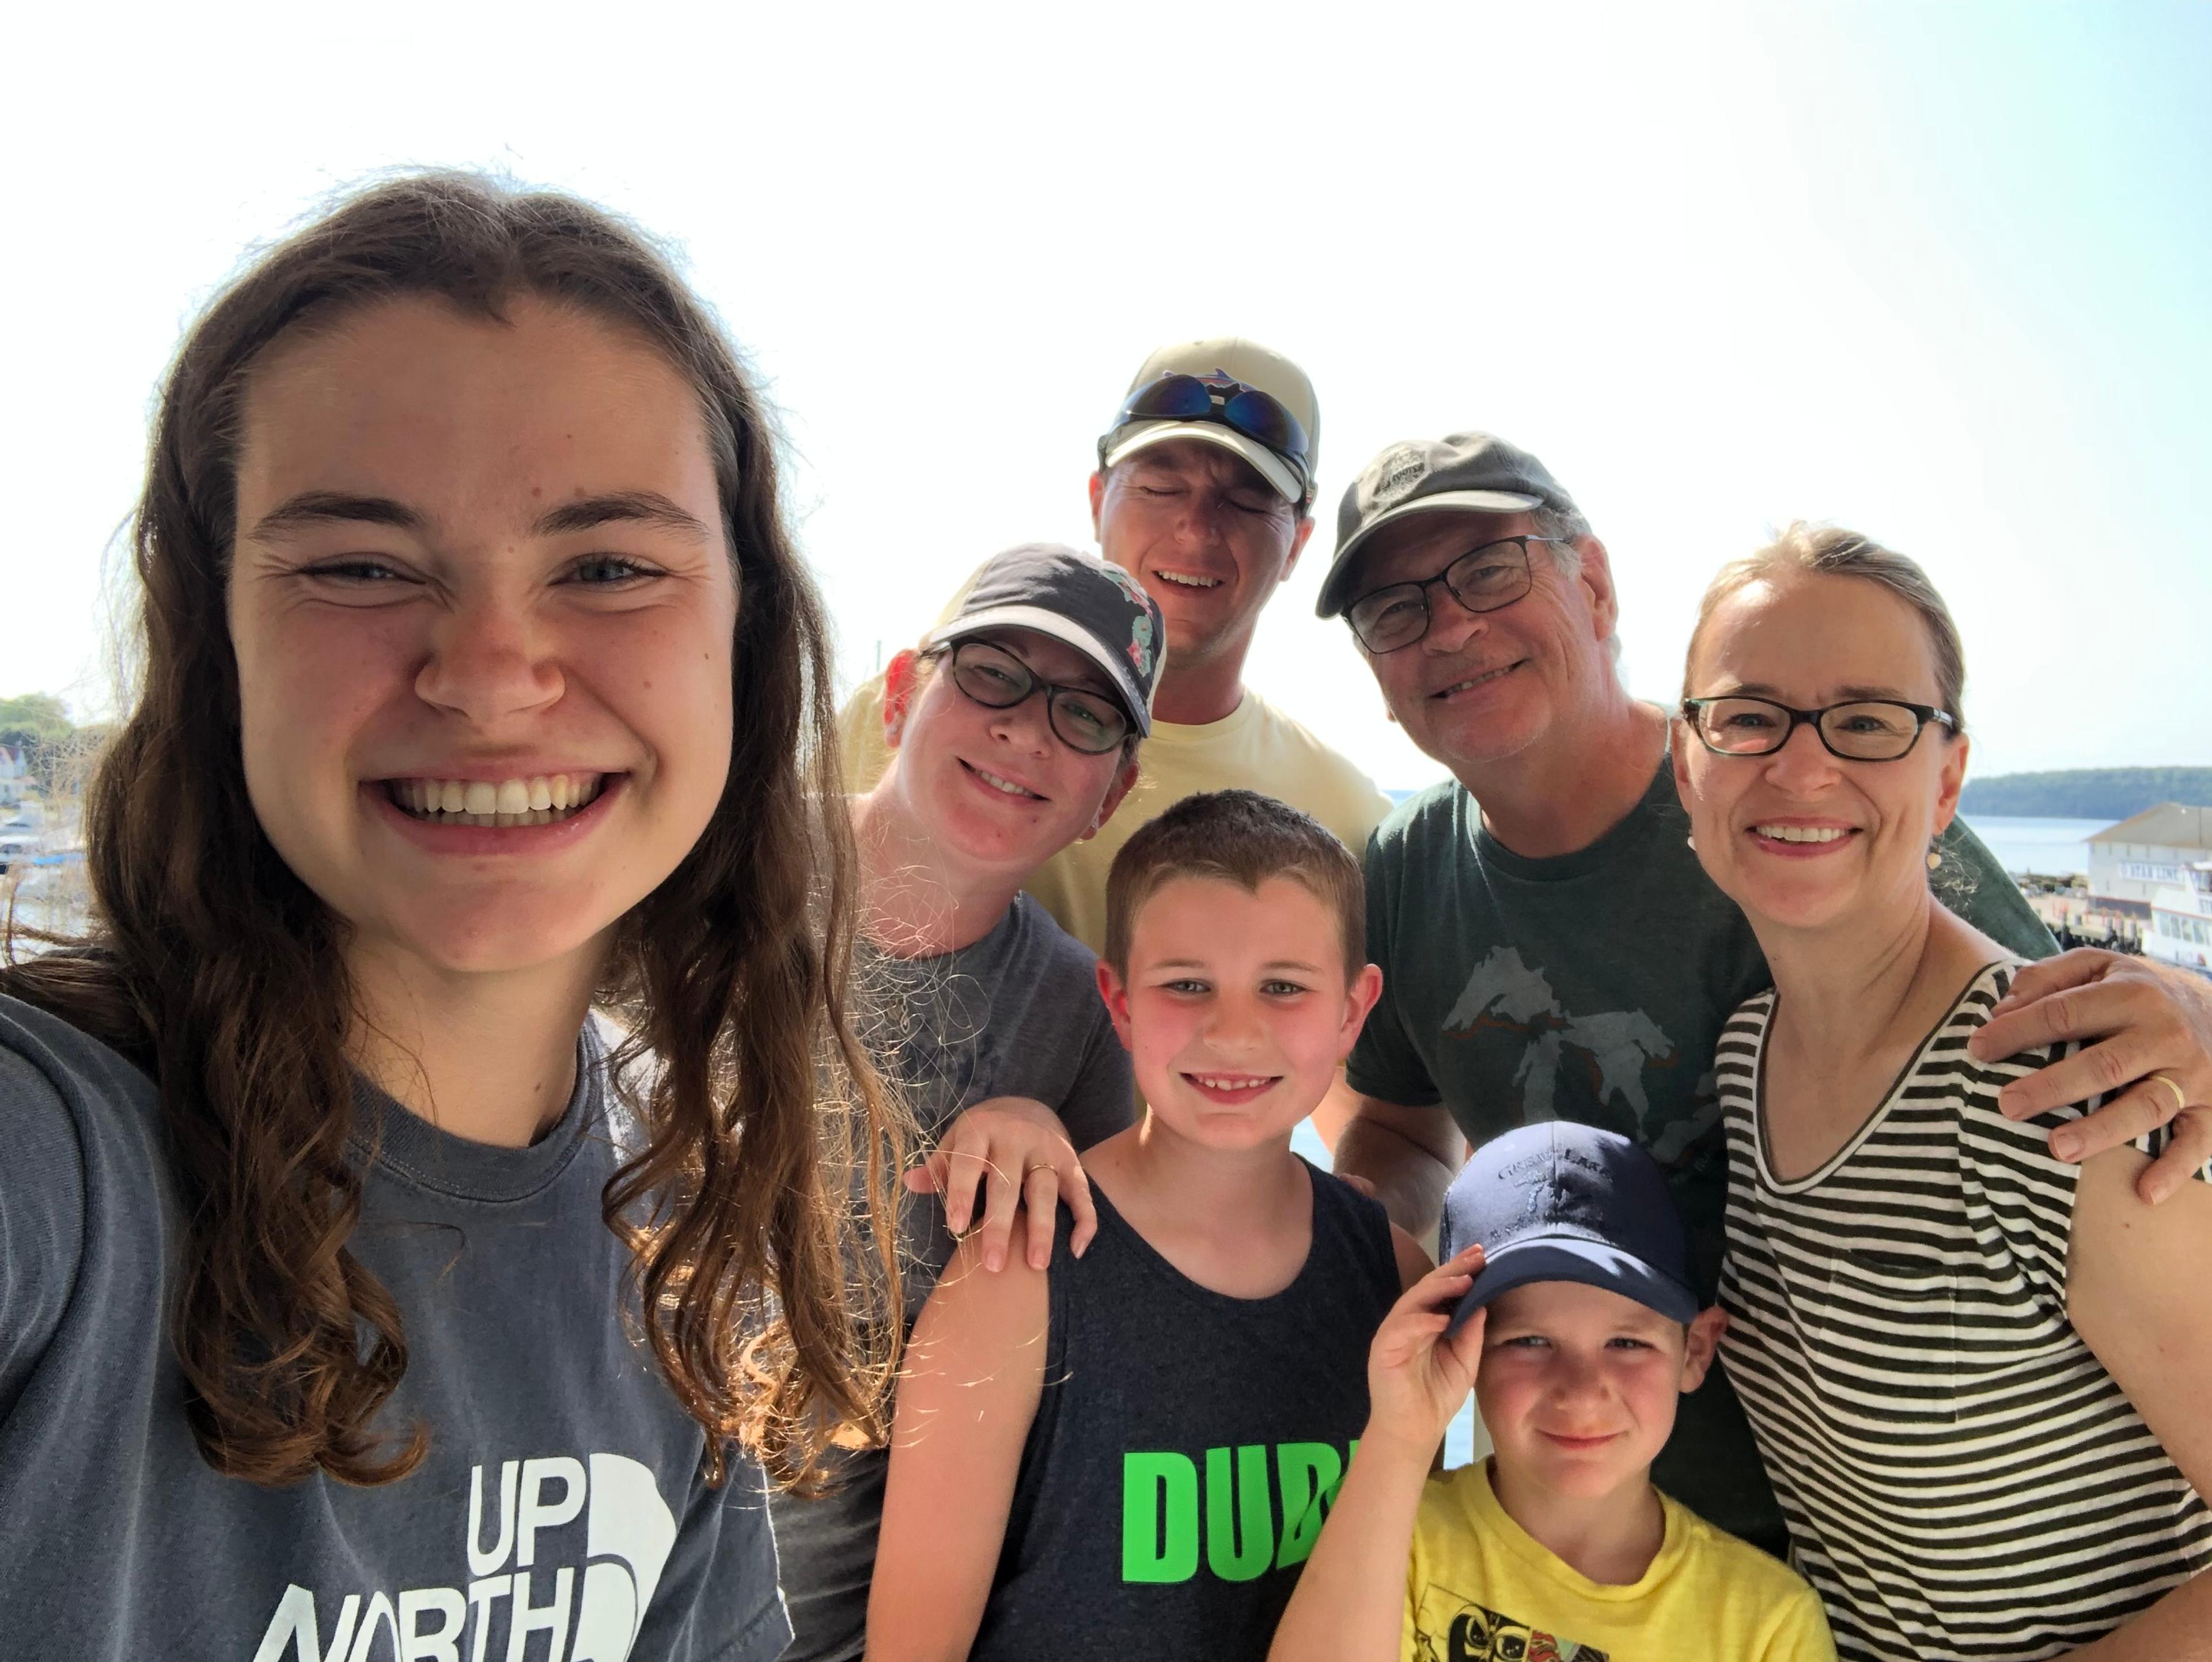 Family on Mackinaw Island, 2019. My two daughters Olivia and, son-in-law Tom, two grandsons Bennett and Jack, and my wife Bonnie